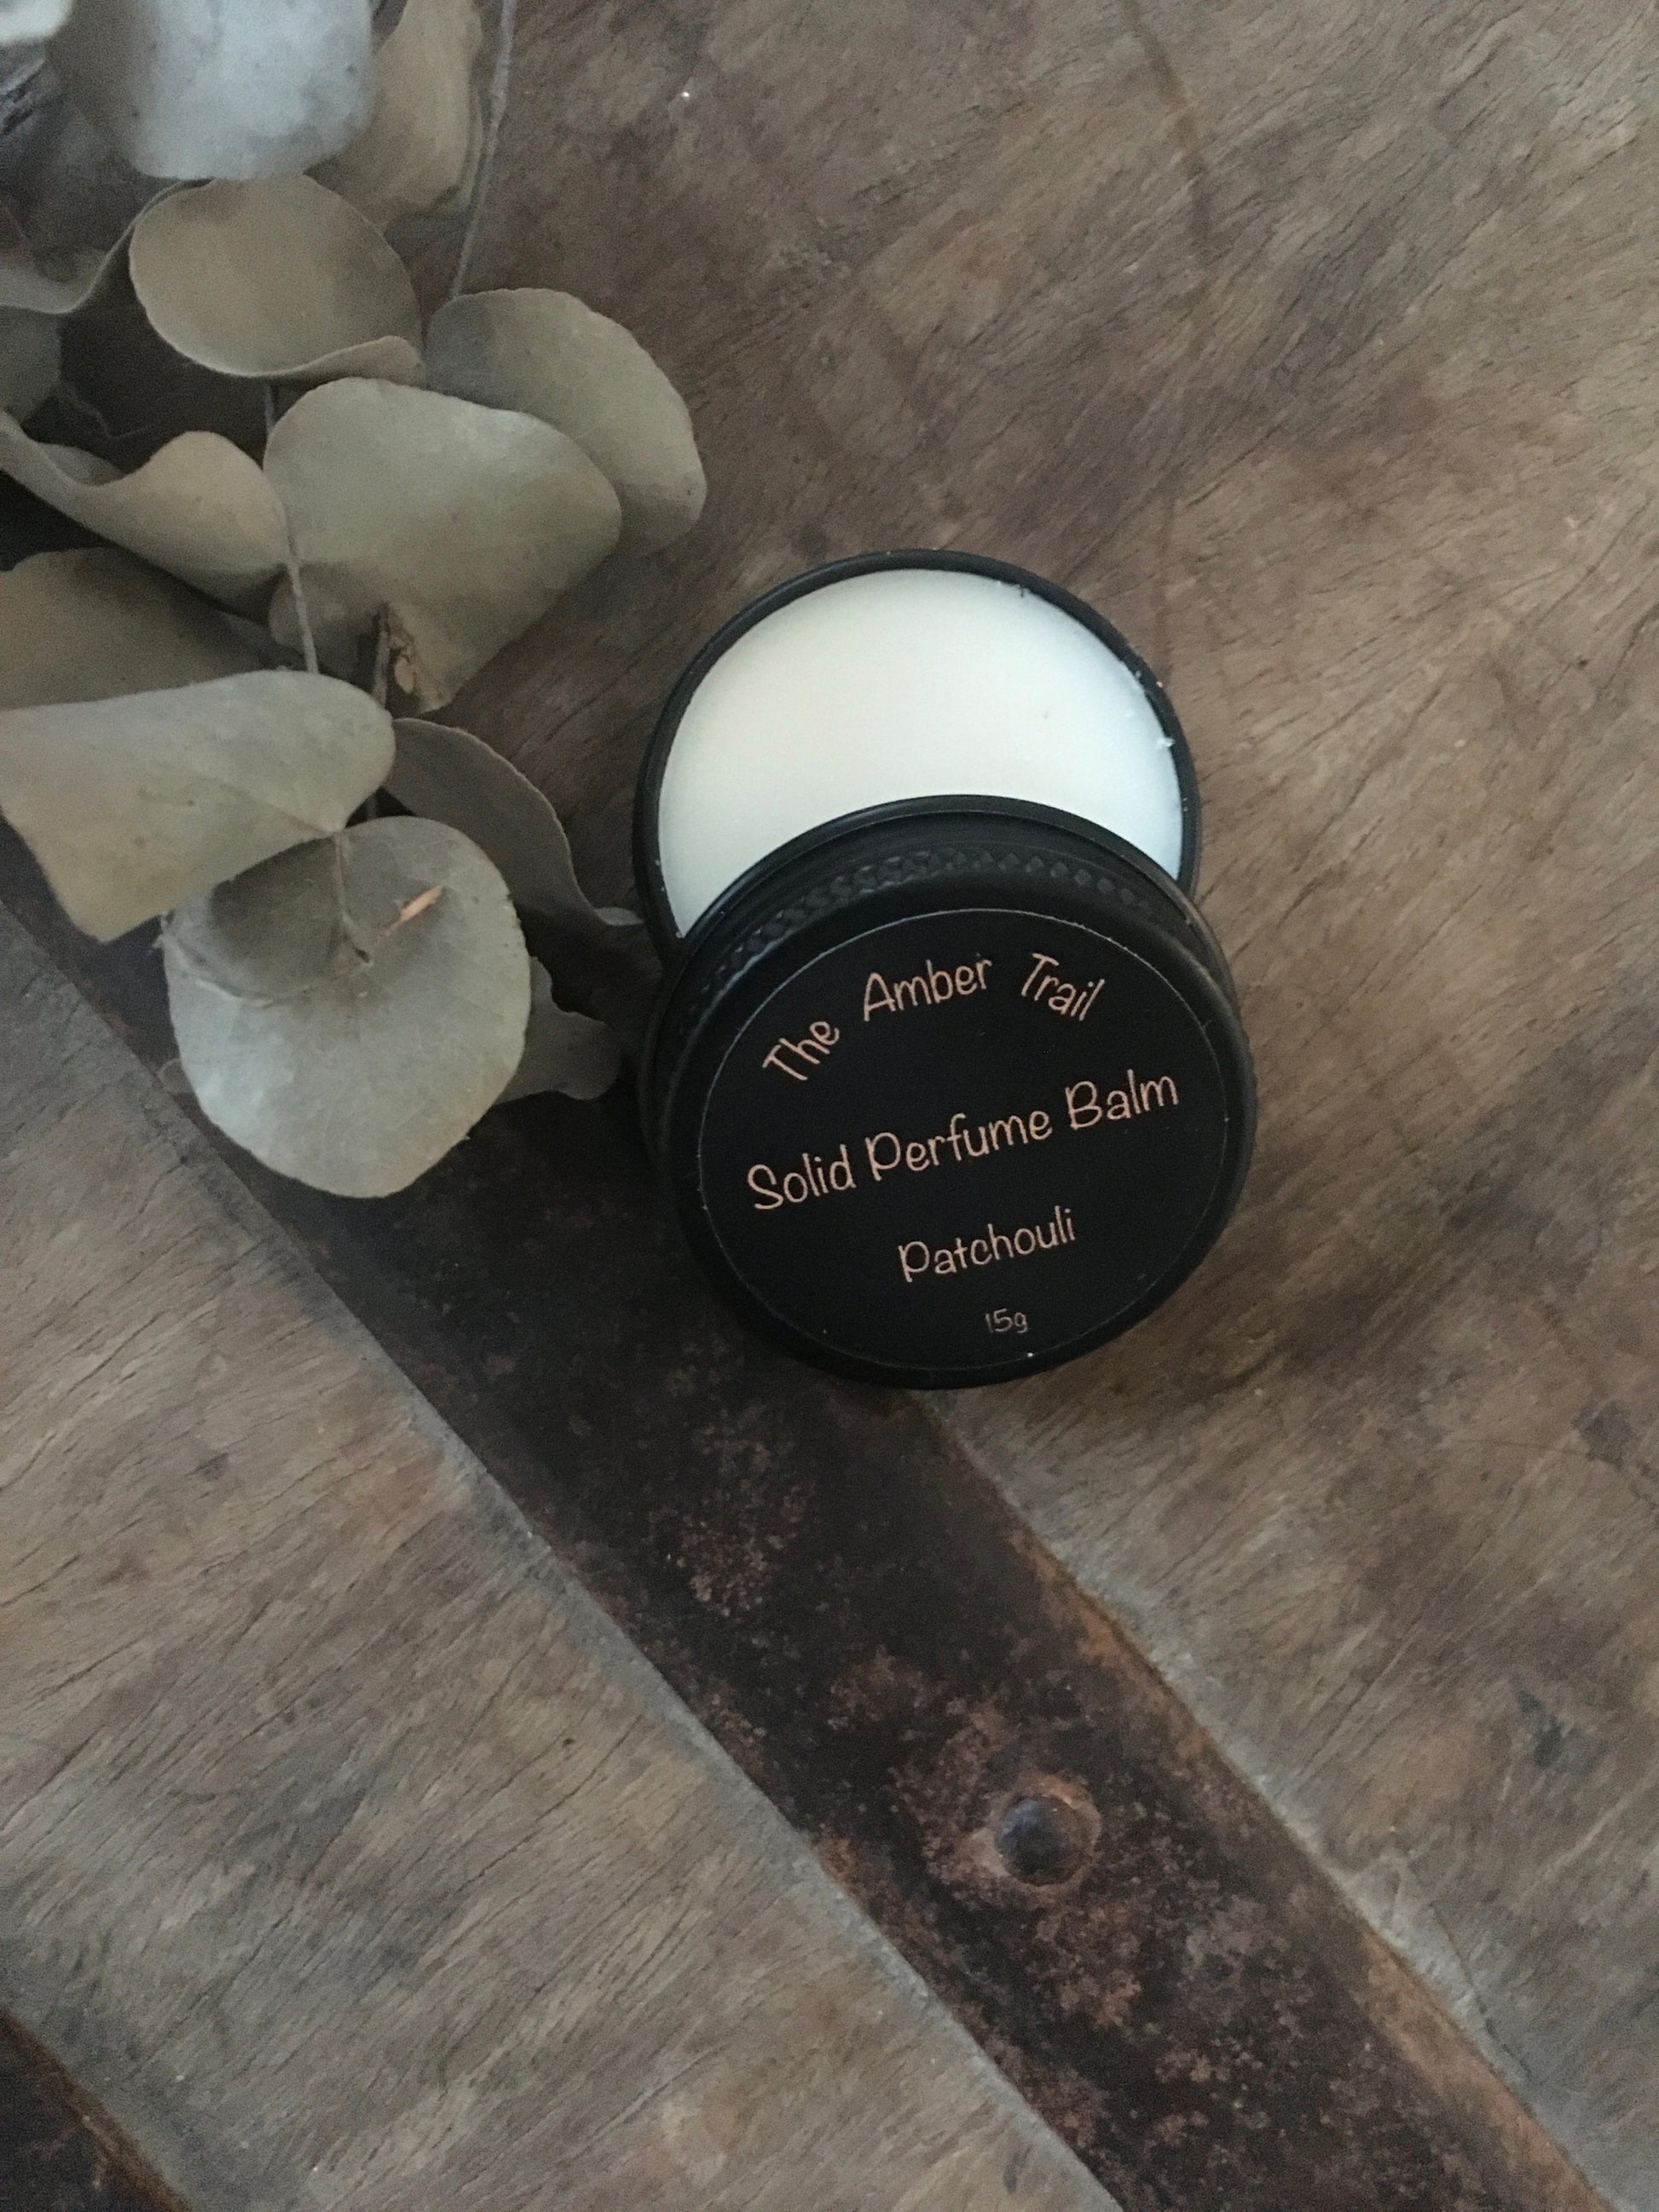 French Perfume Balms - Patchouli - The Amber Trail